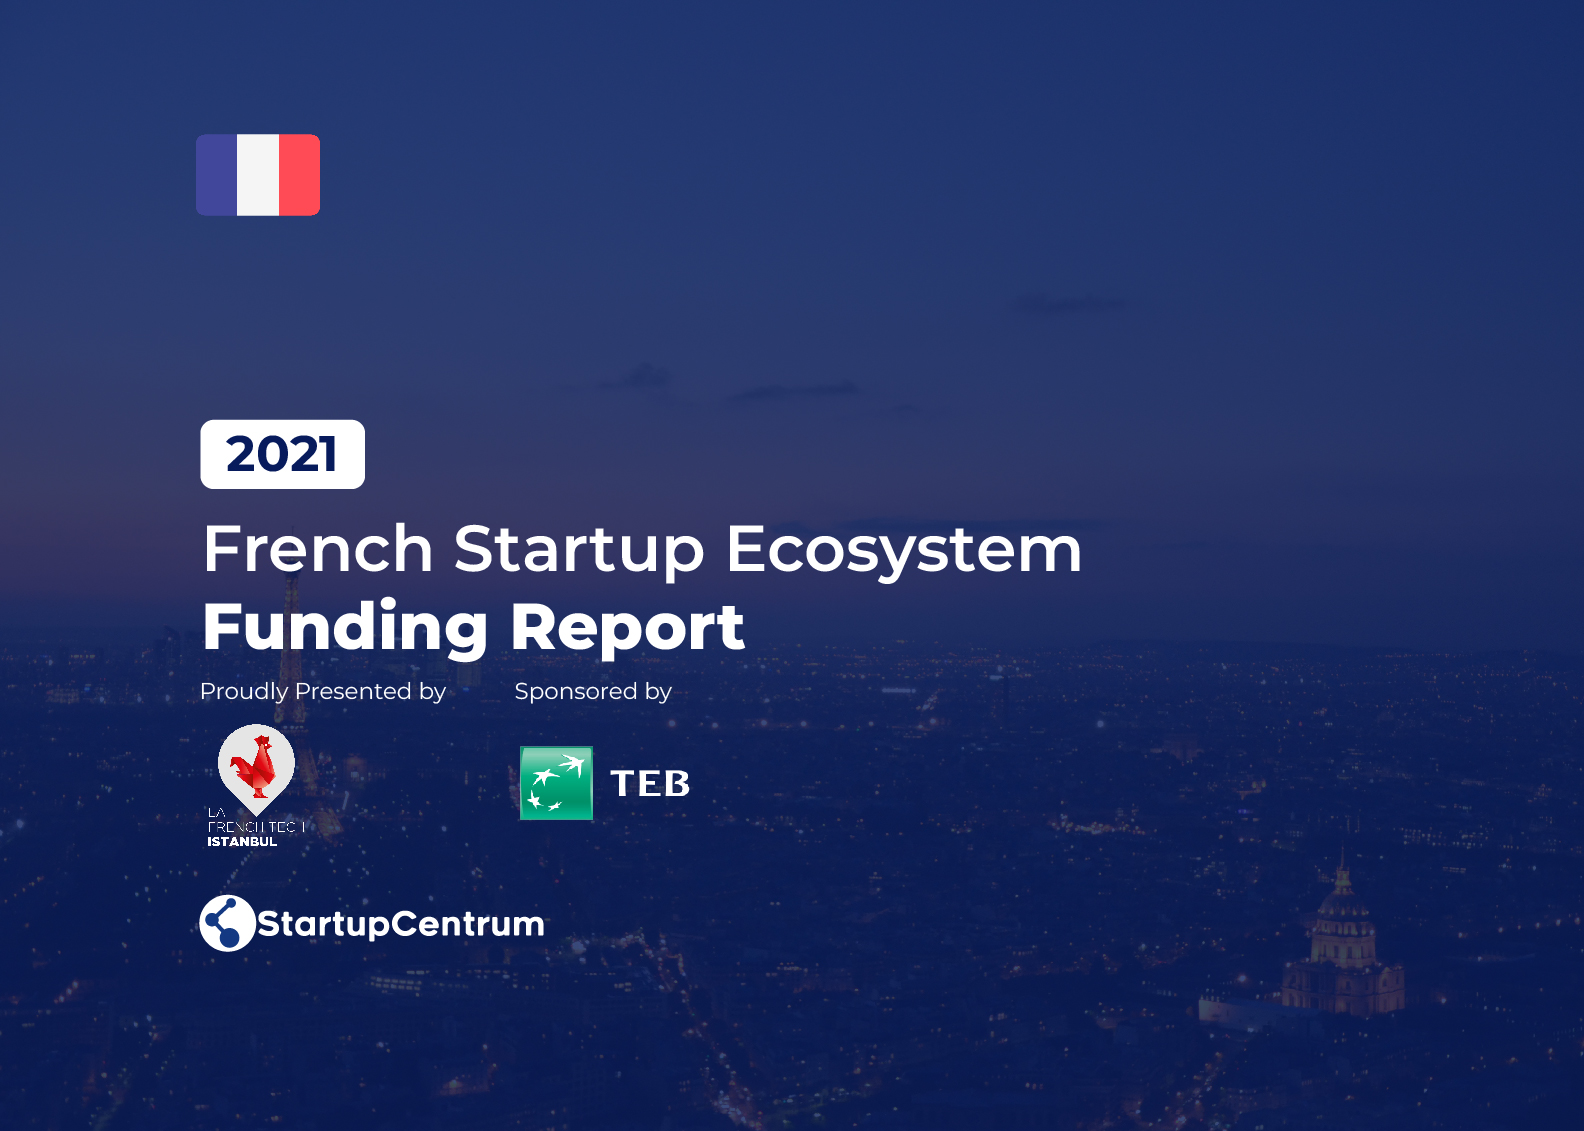 2021 - French Startup Ecosystem Investment Report Cover Image